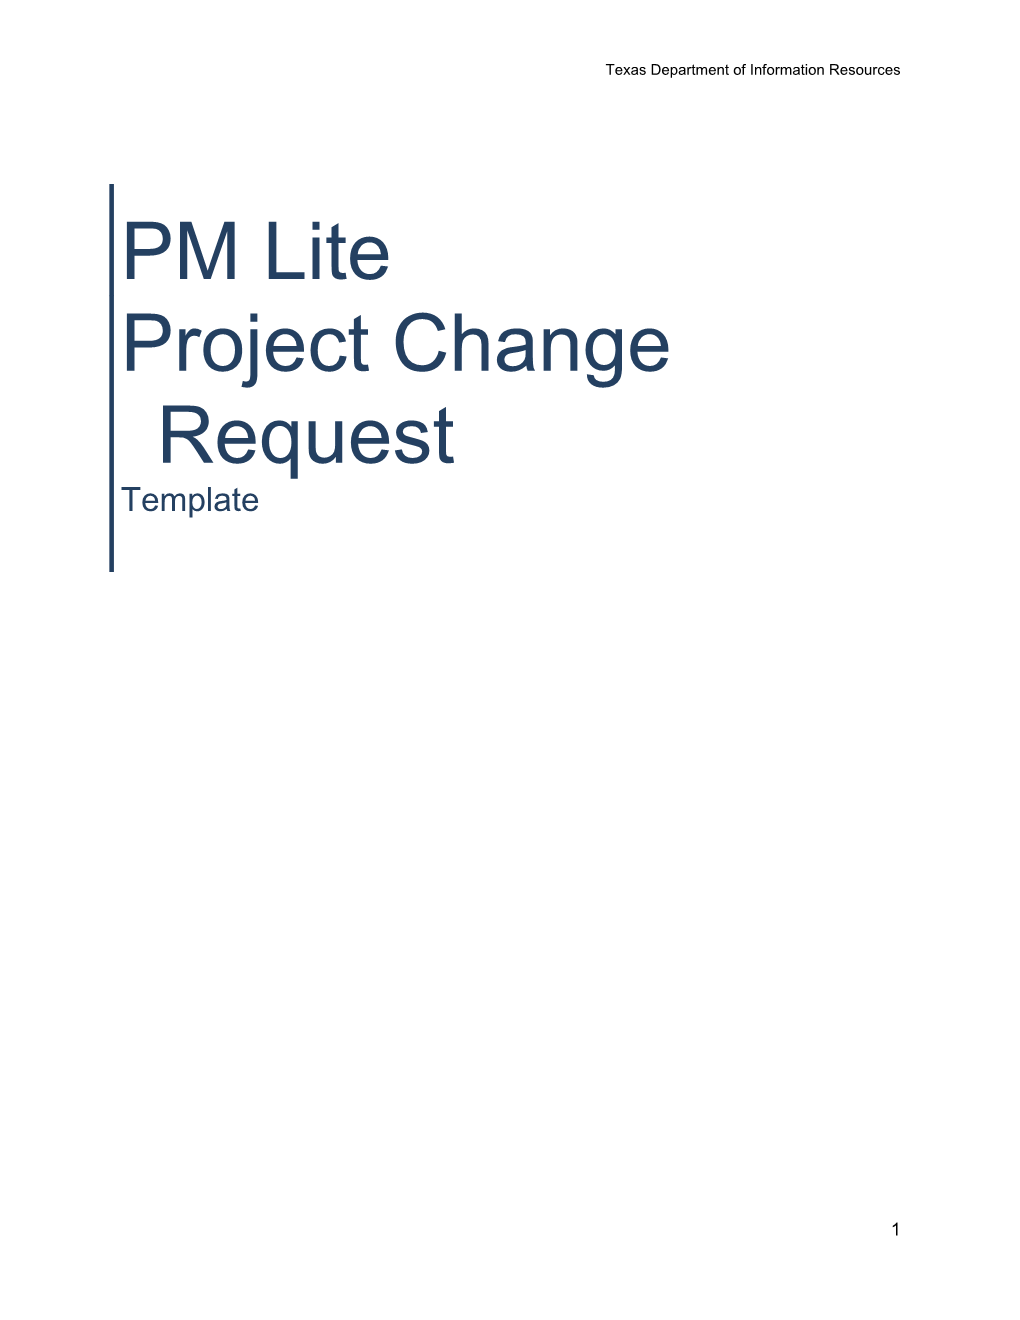 PM Lite Project Change Request Template